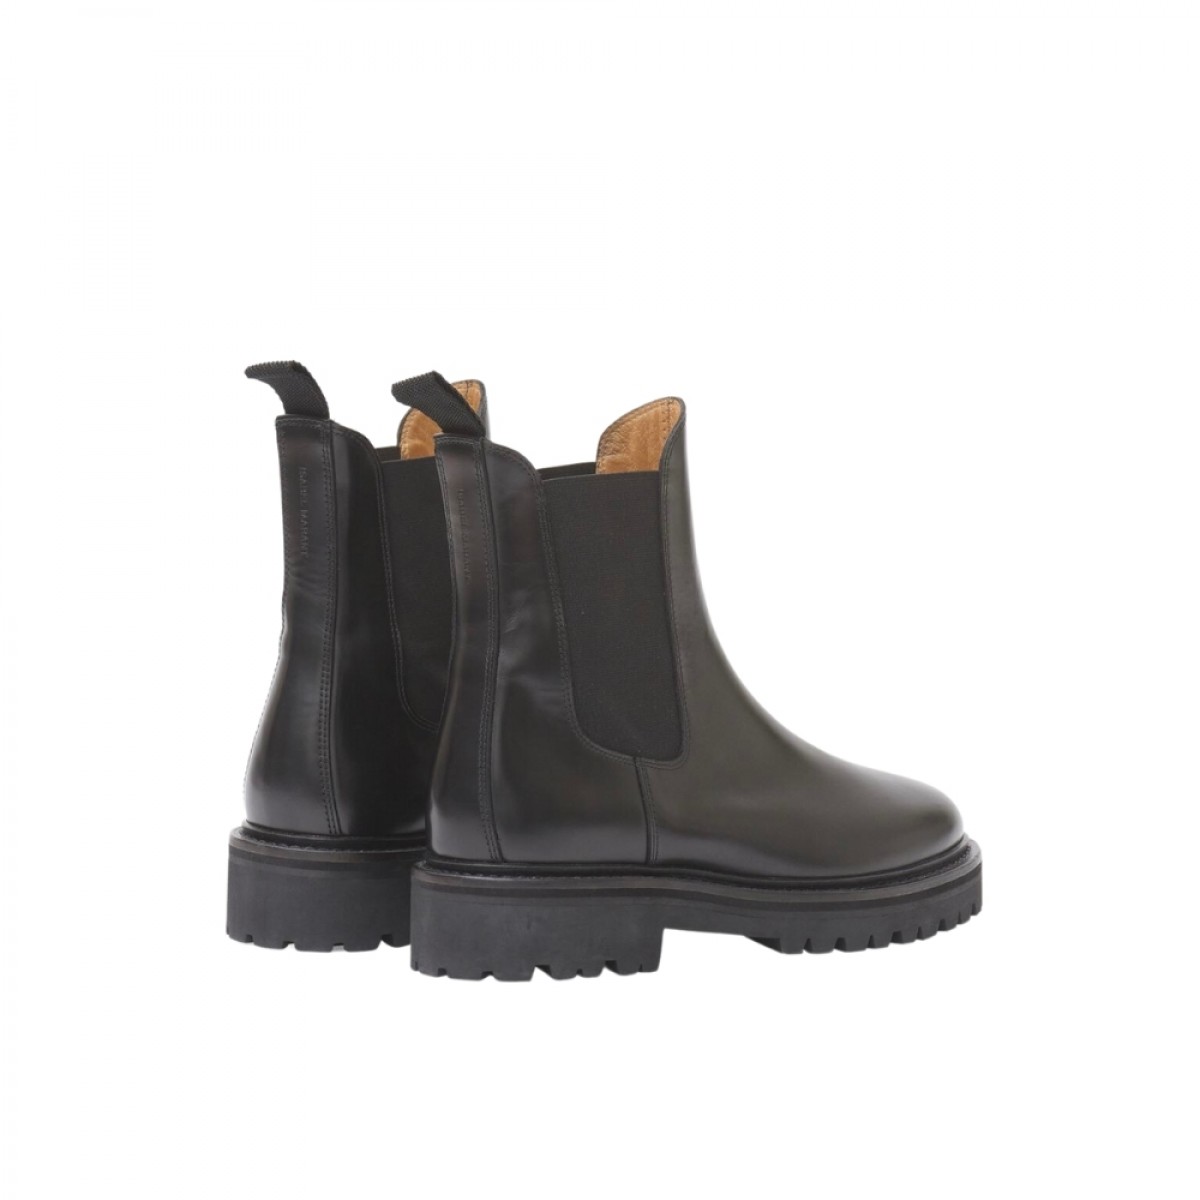 castay chelsea boots - black - bagfra 